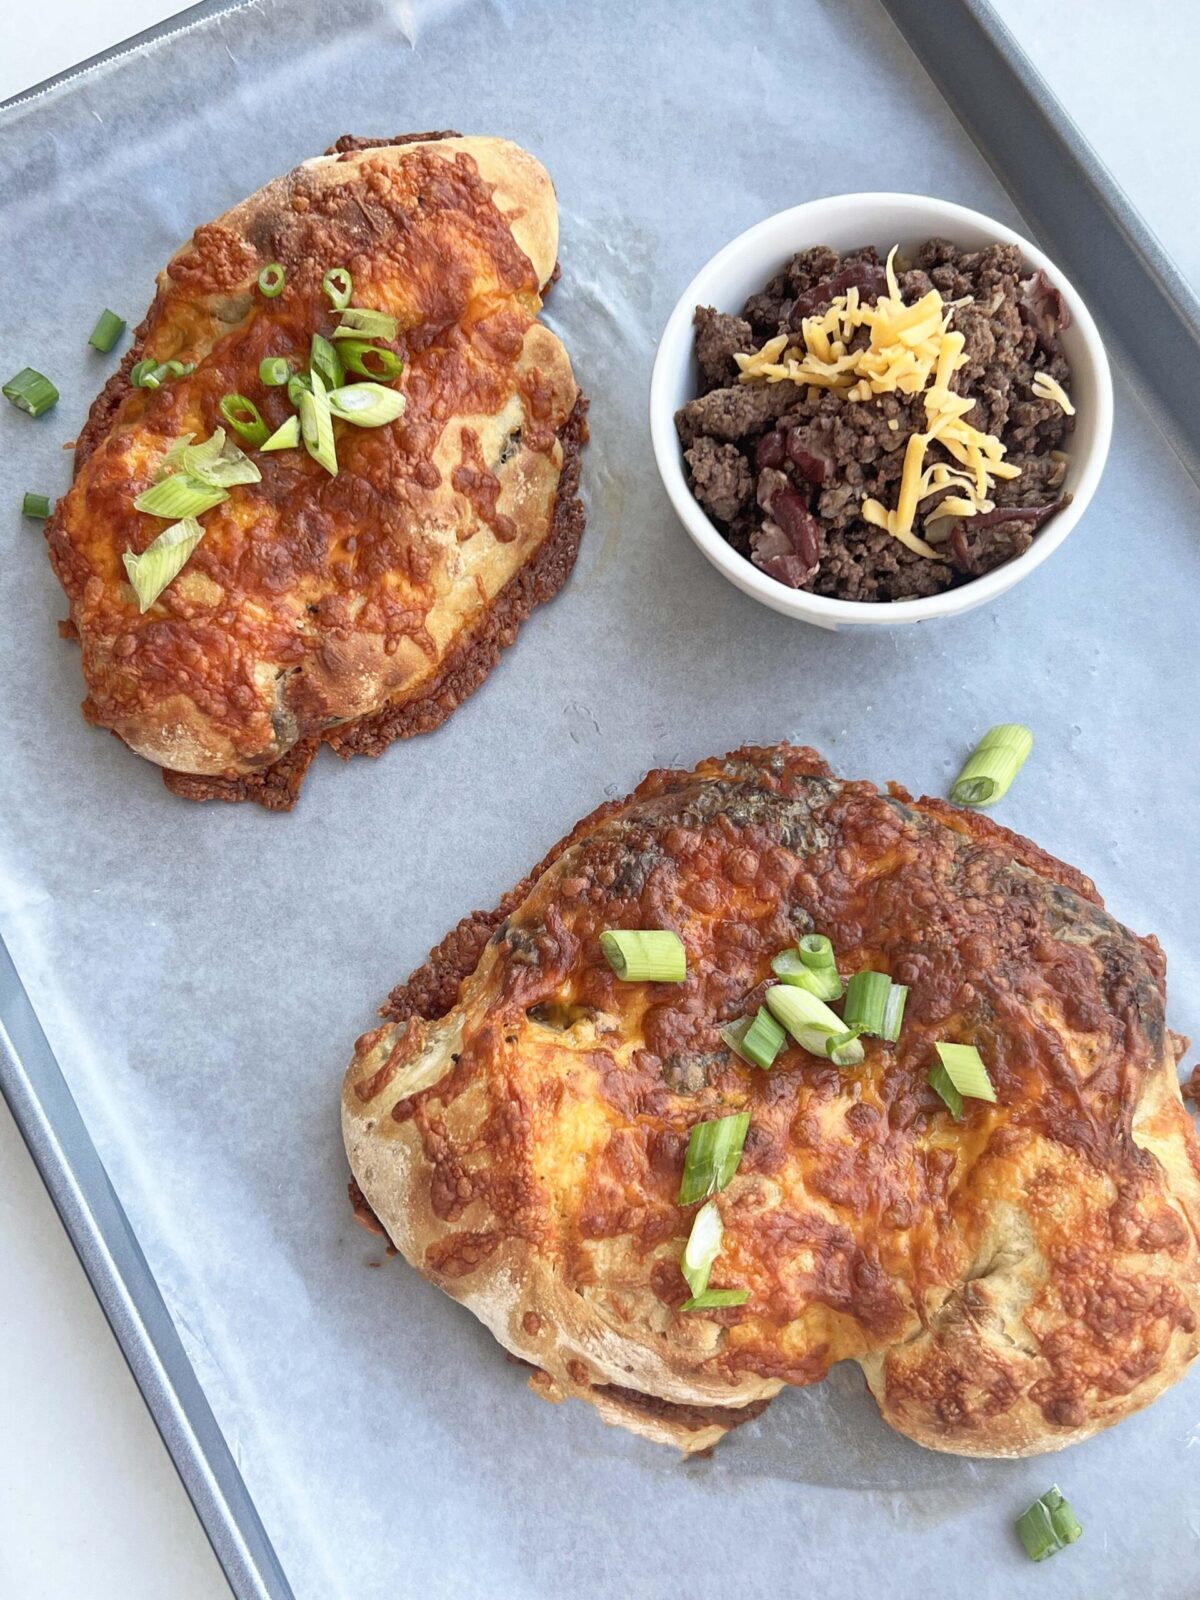 Cincinnati Chilli Calzone. This is in honor of the bangles going to the super bowl. This is a take on Cincinnati Chili. www.ChopHappy.com #chili #calzone